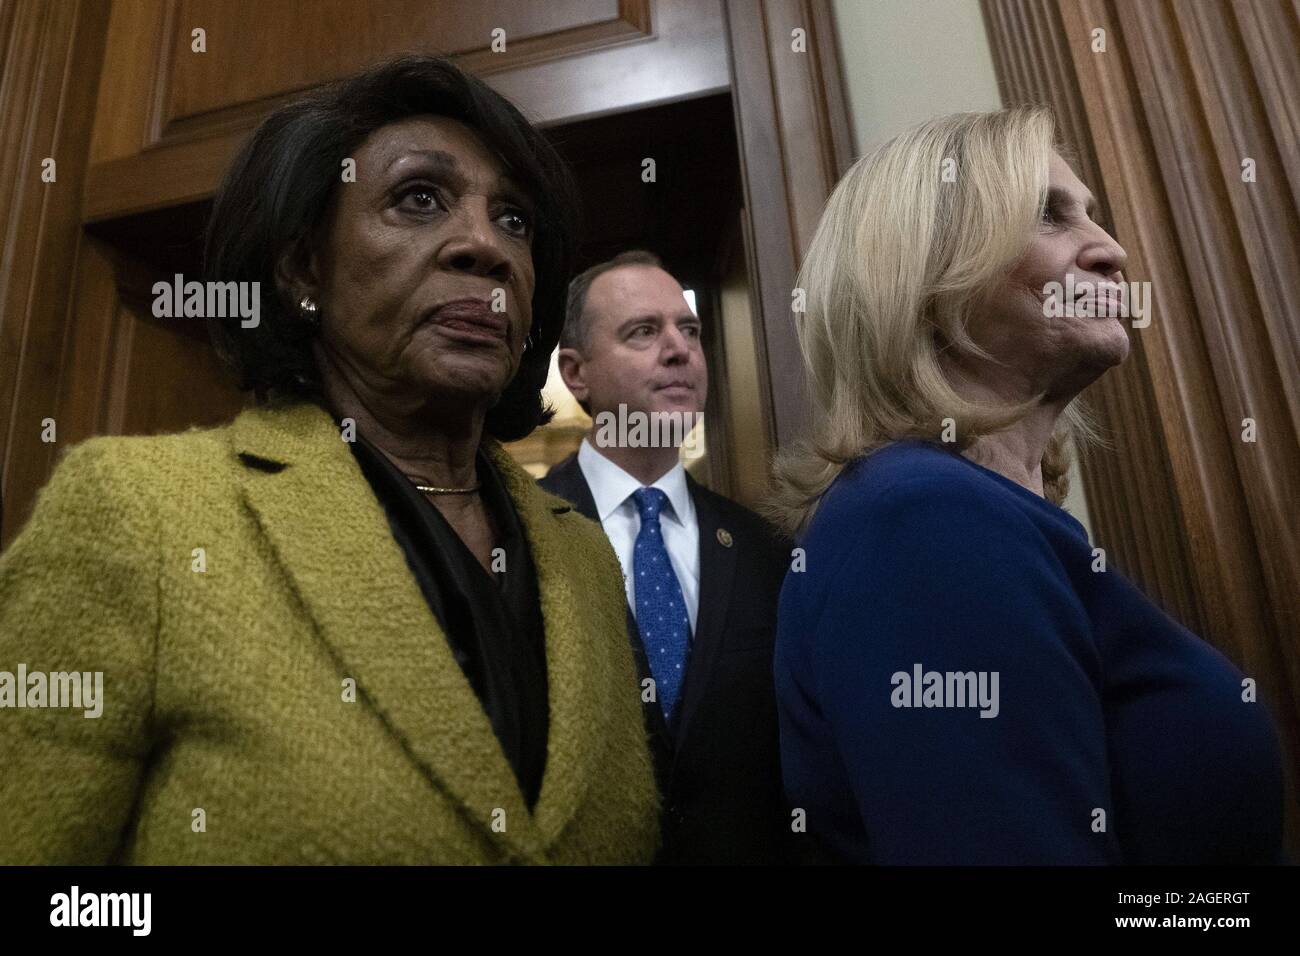 Washington, District of Columbia, USA. 18th Dec, 2019. From left to right: United States Representative Maxine Waters (Democrat of California), United States Representative Adam Schiff (Democrat of California), and United States Representative Carolyn Maloney (Democrat of New York), United States enter a press conference after the United States House of Representatives voted to impeach United States President Donald J. Trump at the United States Capitol in Washington, DC, U.S., on Wednesday, December 18, 2019. Credit: ZUMA Press, Inc./Alamy Live News Stock Photo